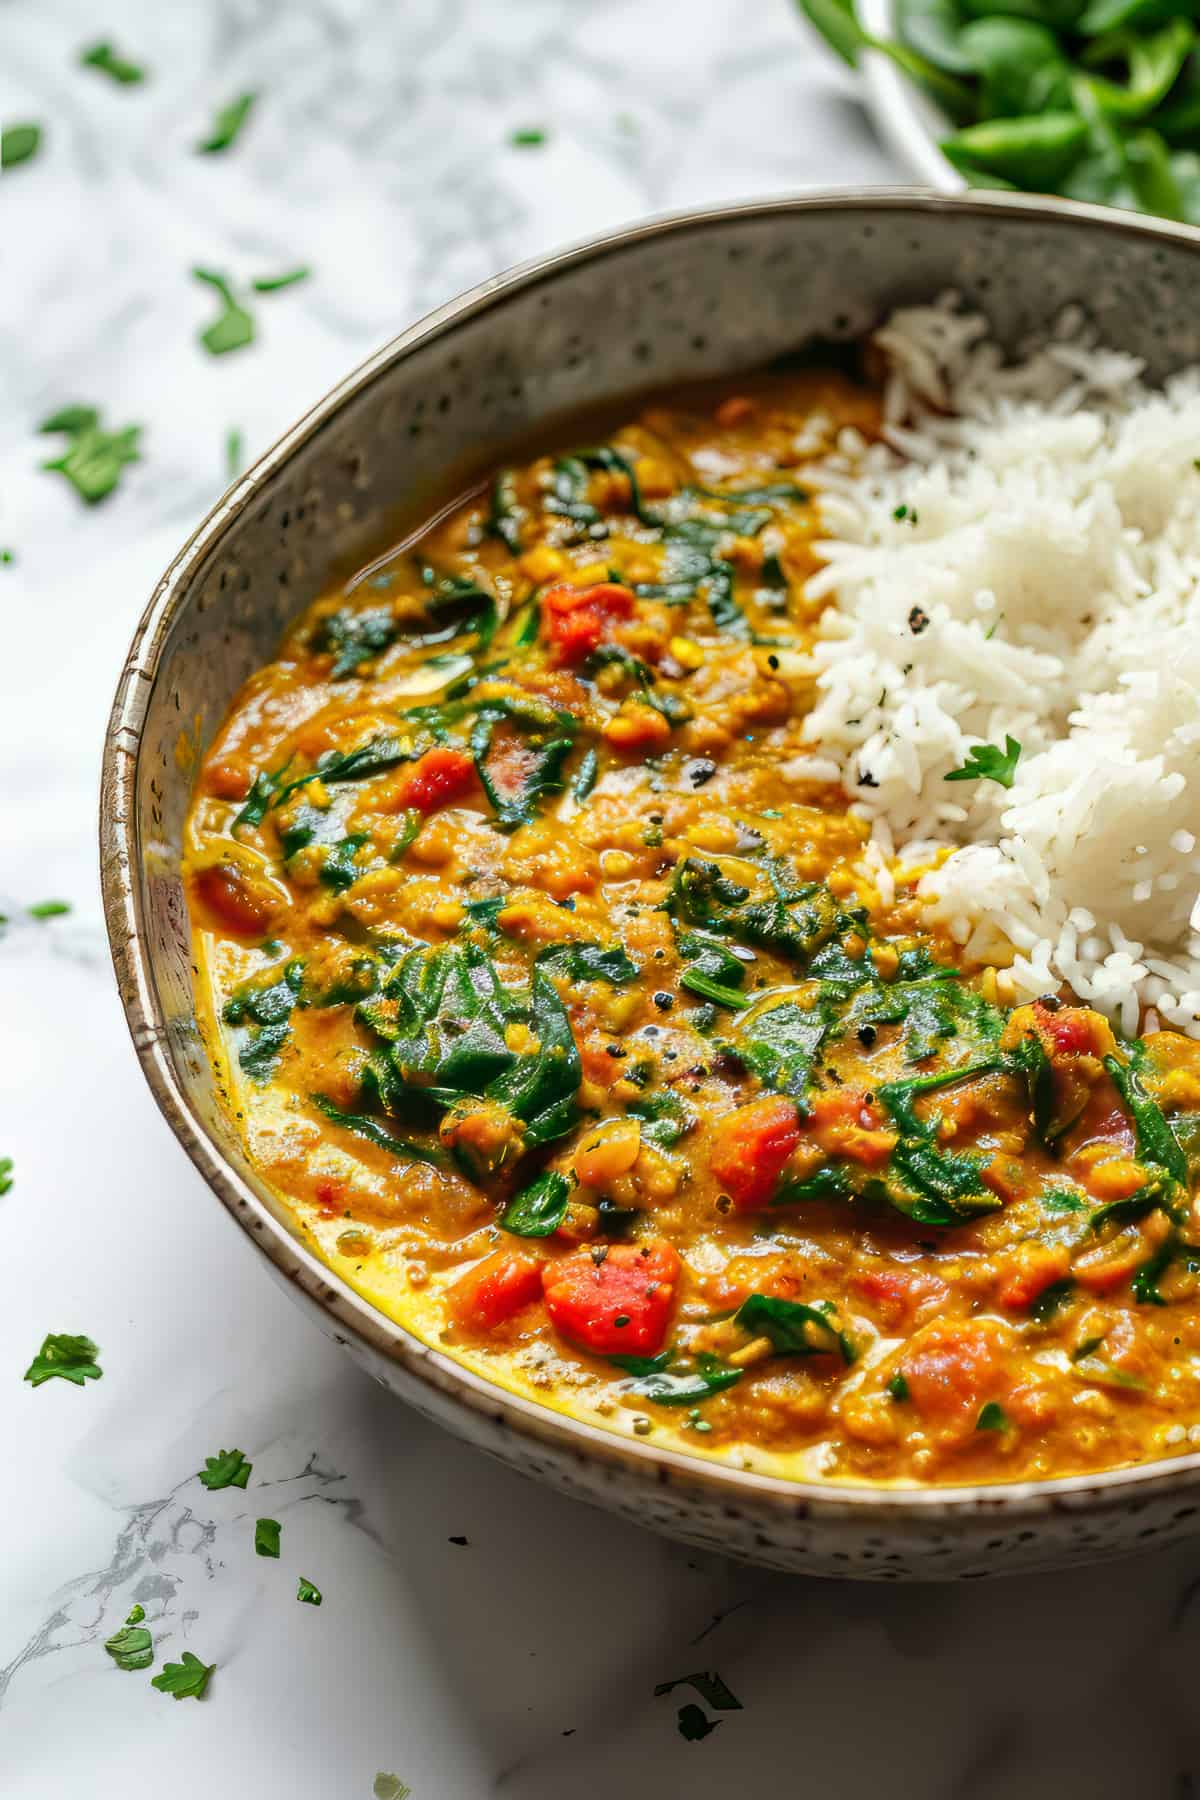 Red lentil curry (dhal) with spinach and tomatoes topped with cilantro.